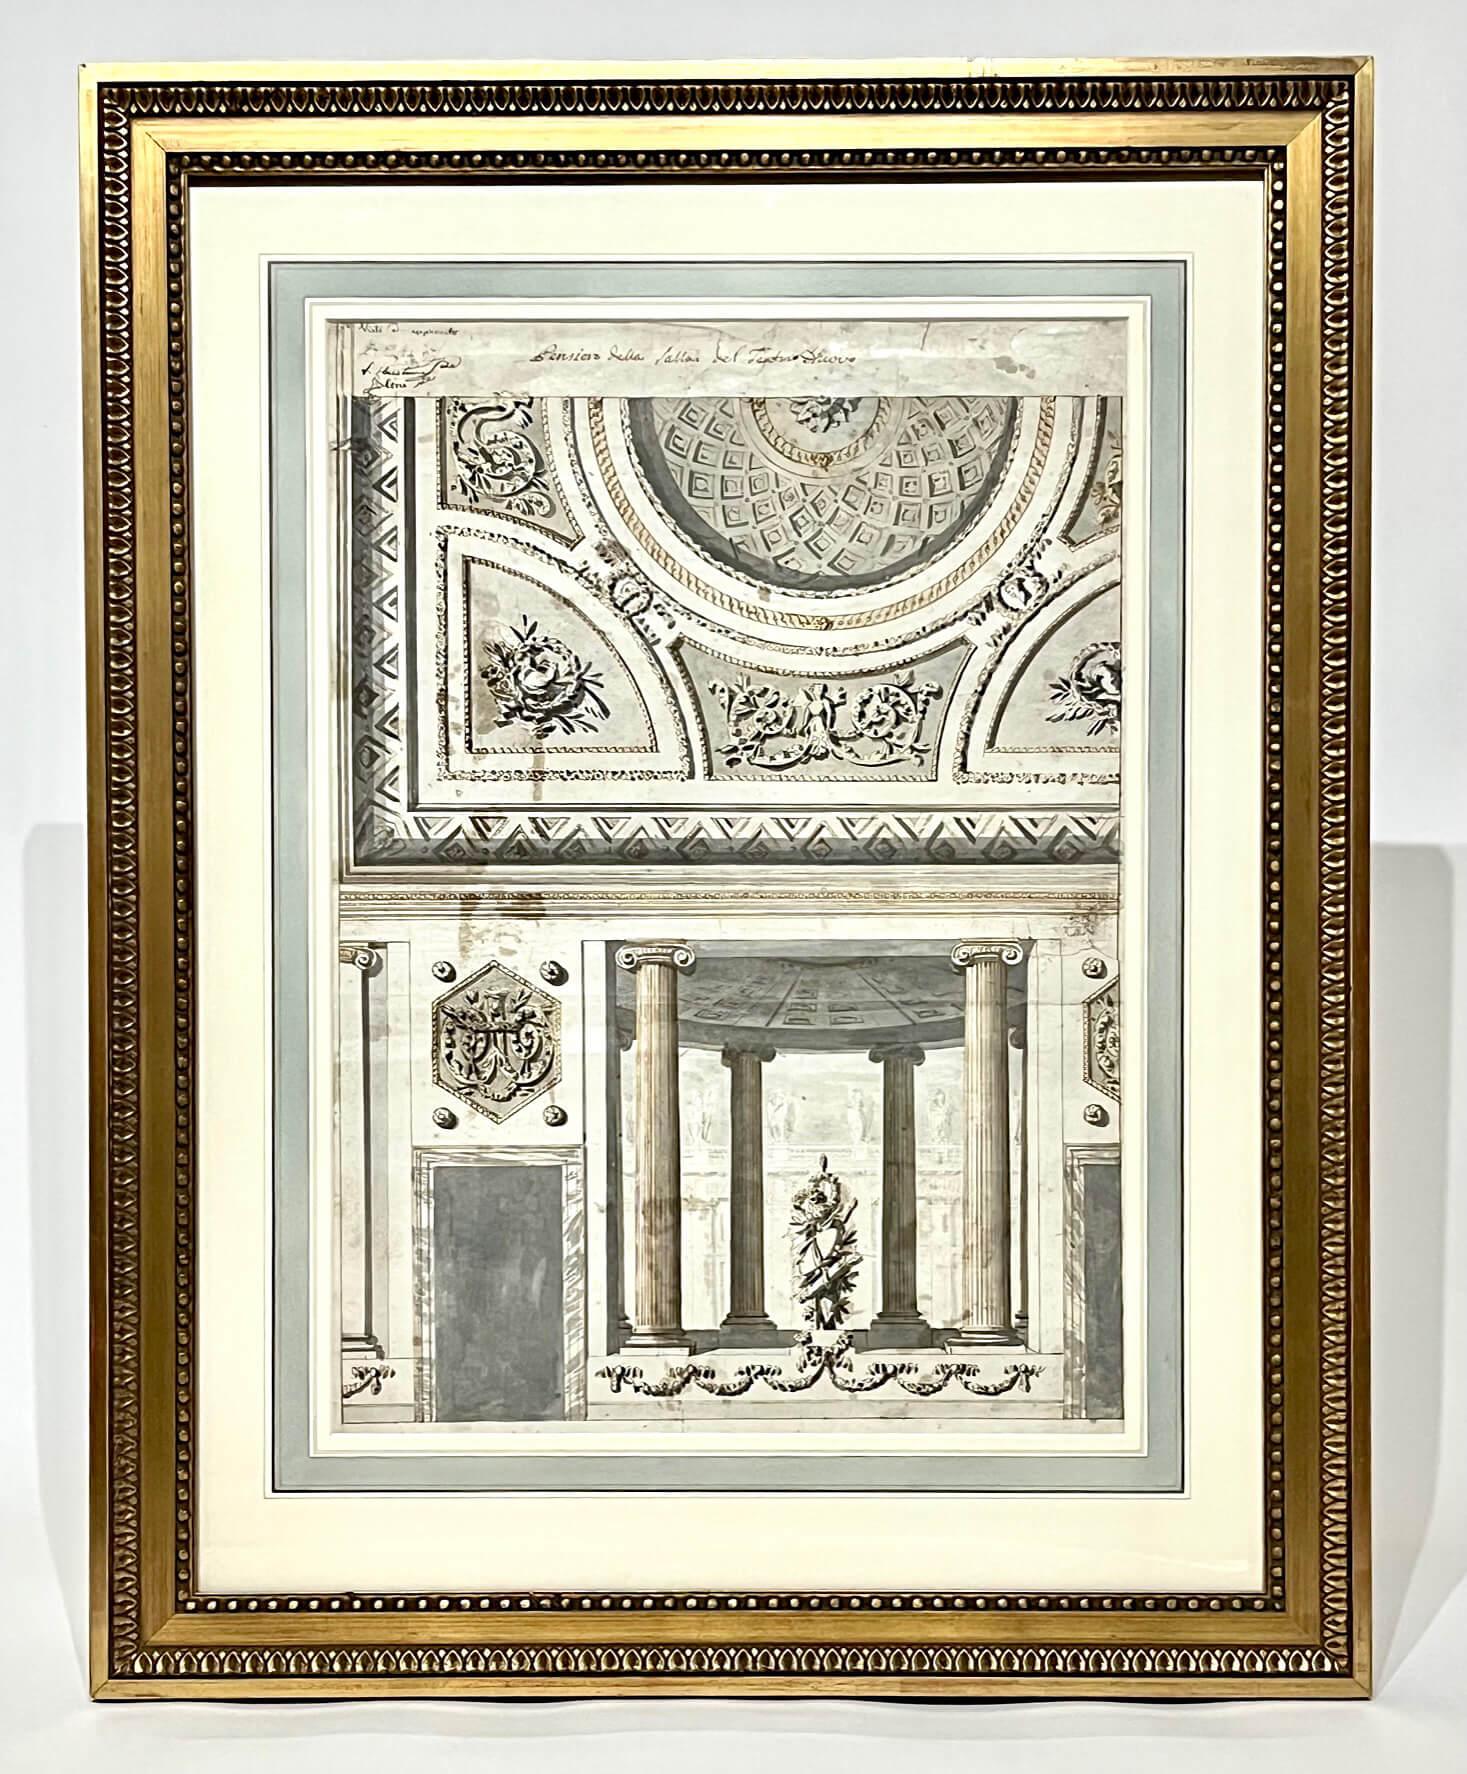 An exquisite Italian circa 1780 large scale ink and watercolor on paper neoclassical architectural elevation proposal for a theatre hall inscribed at the top 